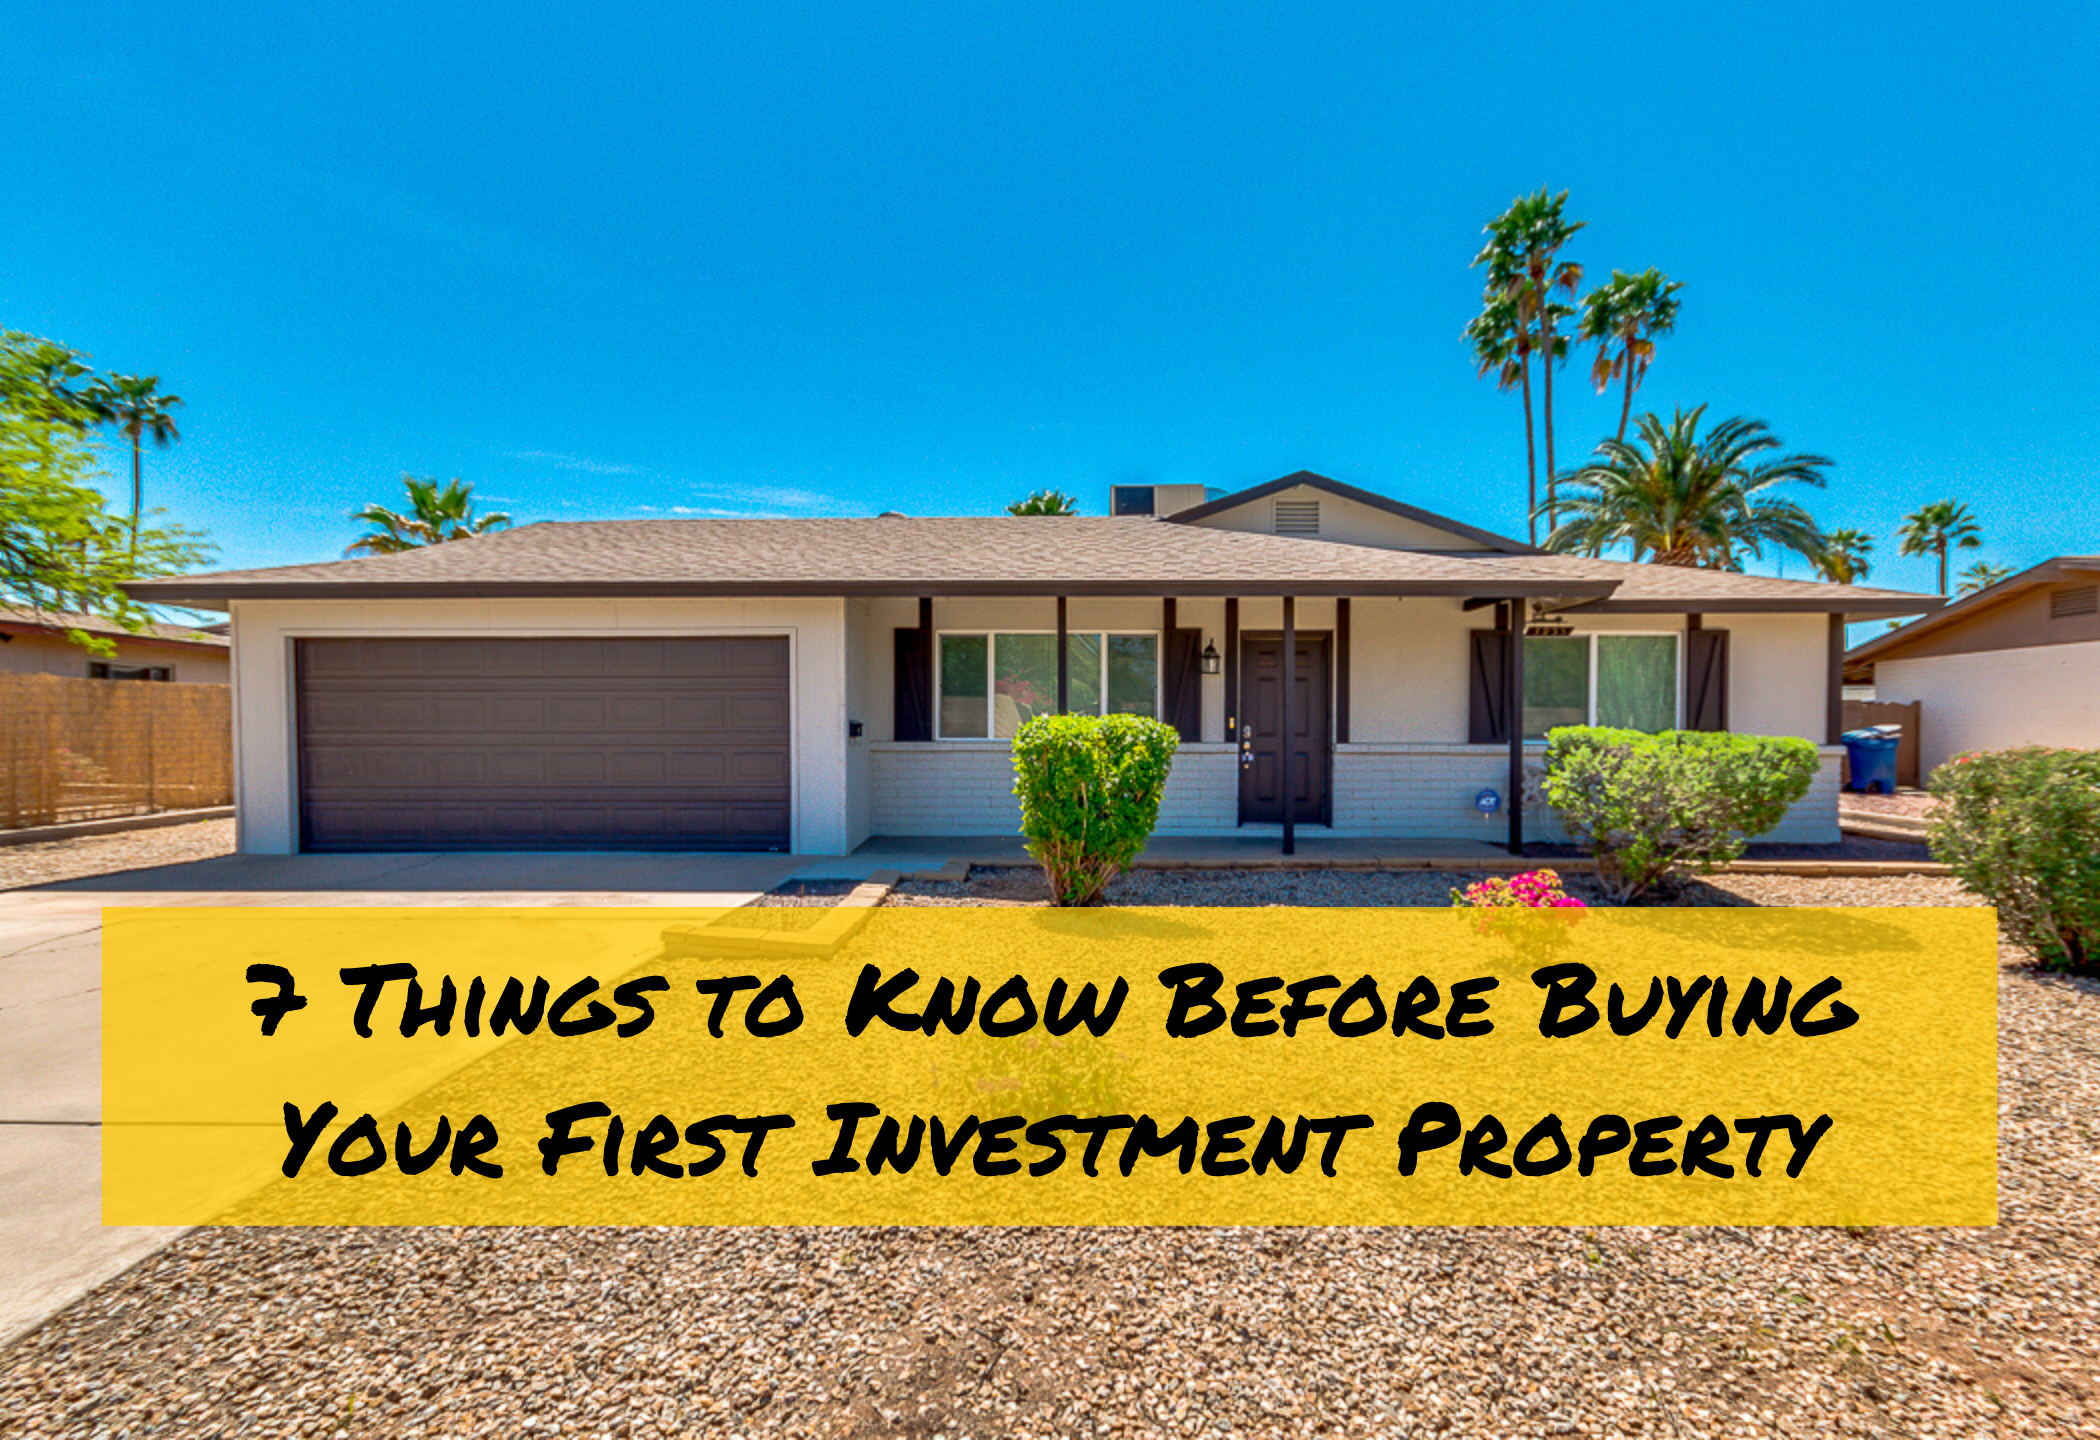 7 Things To Know Before Buying Your First Investment Property